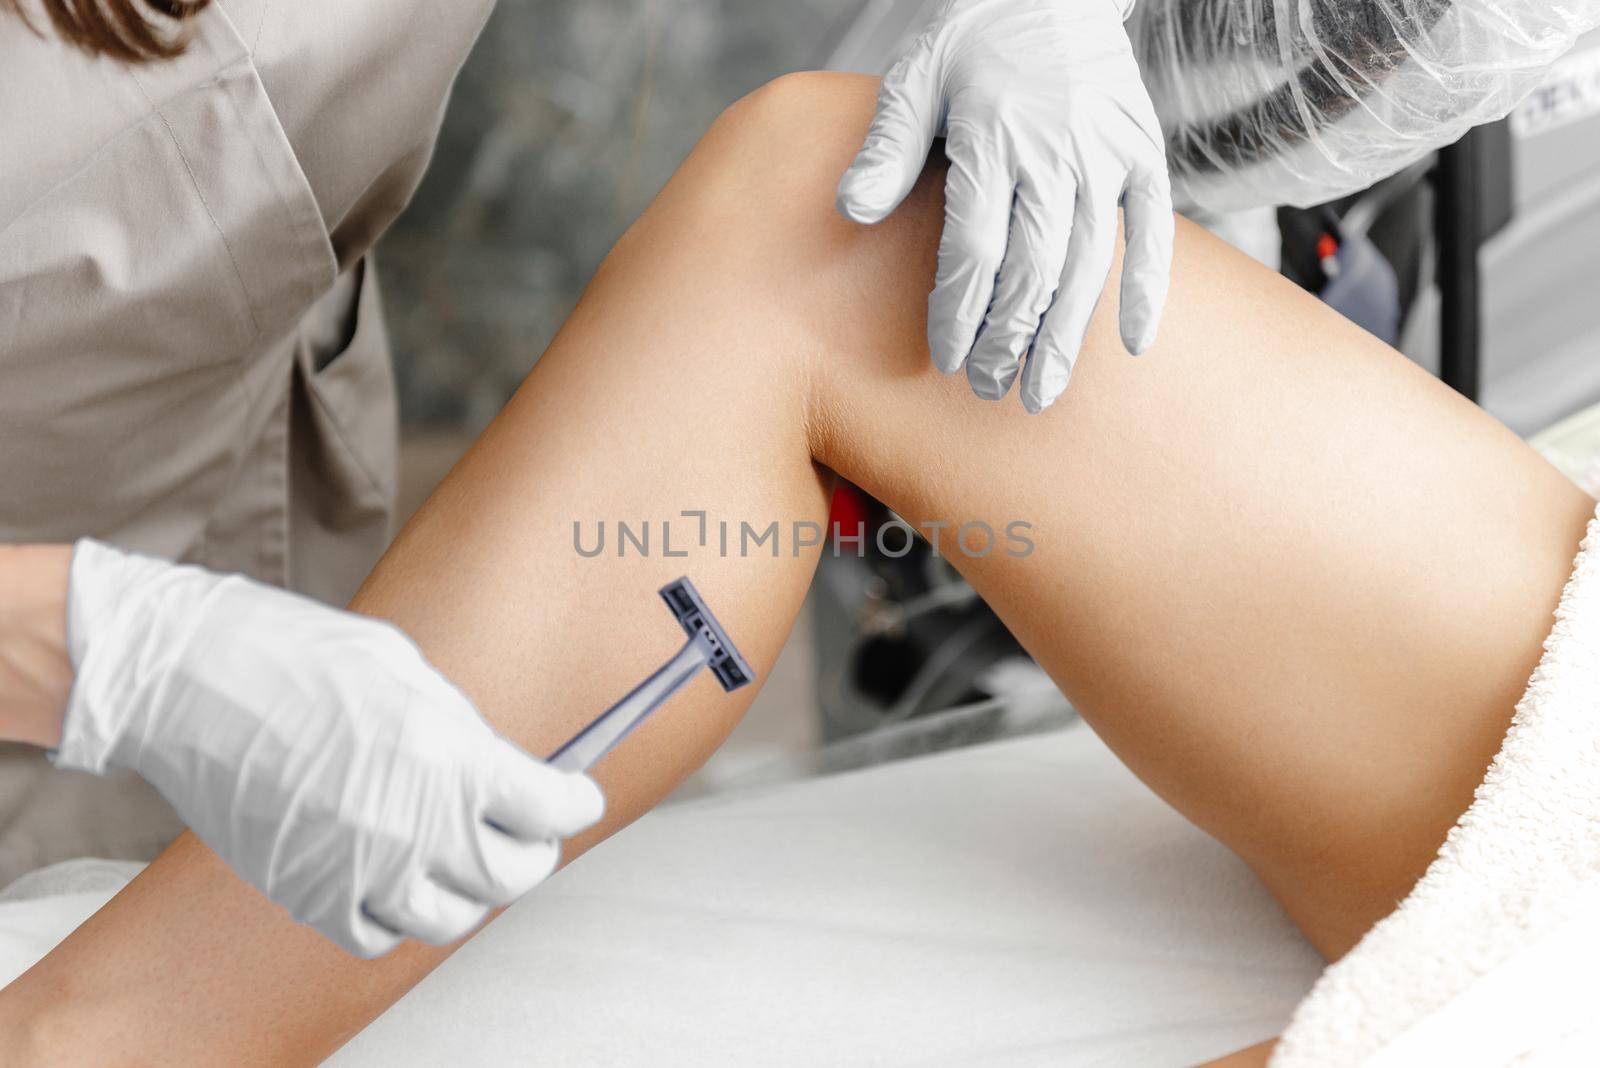 A girl at a laser hair removal procedure shaves her legs before the procedure. Hair removal with a razor. Master shaves client's legs by gulyaevstudio